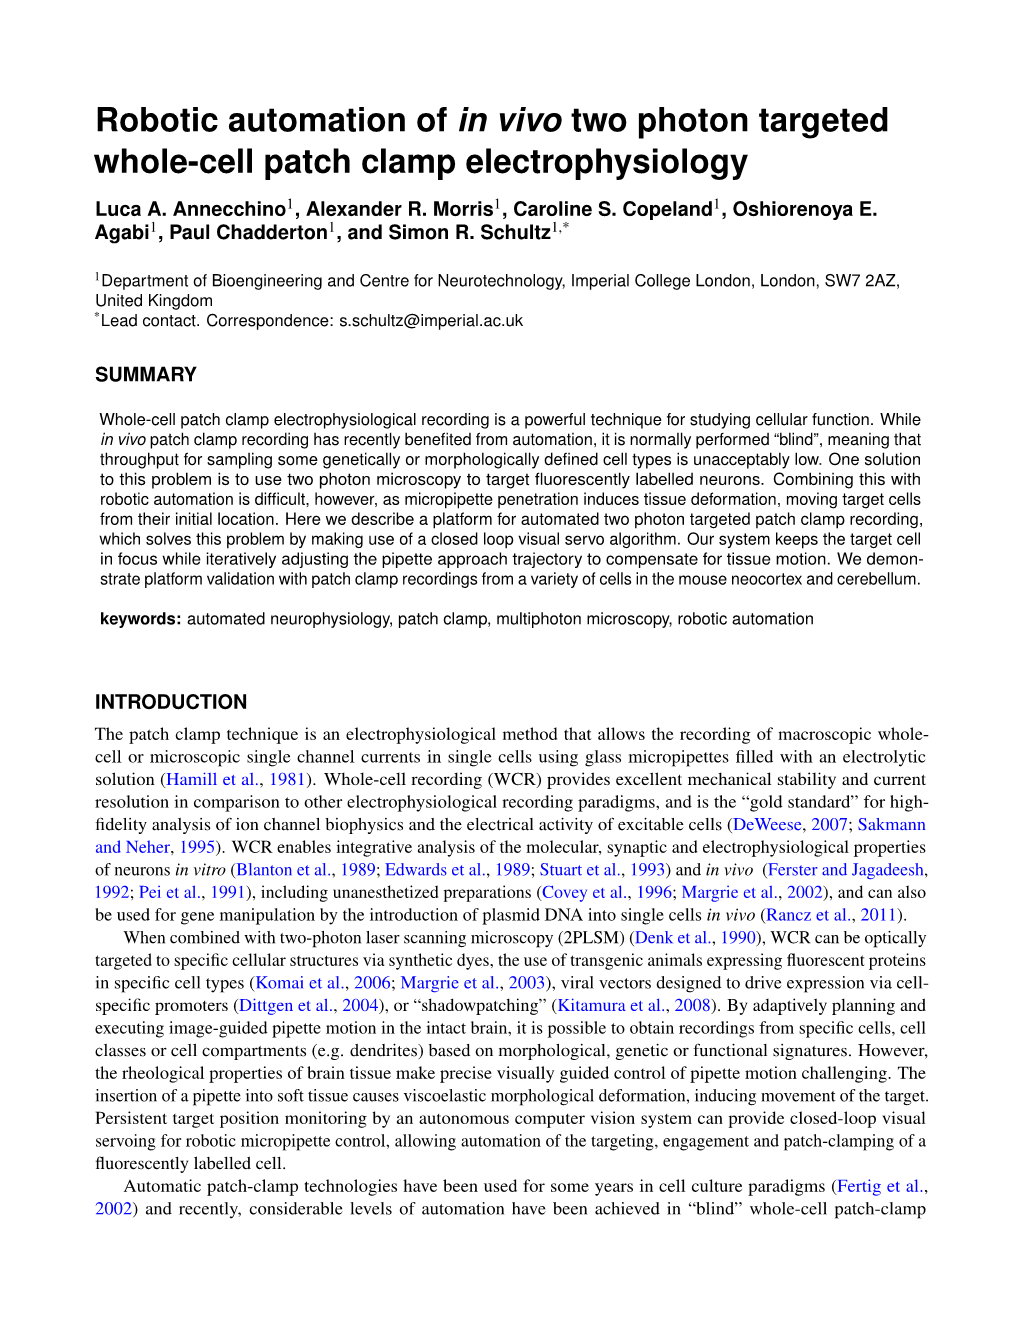 Robotic Automation of in Vivo Two Photon Targeted Whole-Cell Patch Clamp Electrophysiology